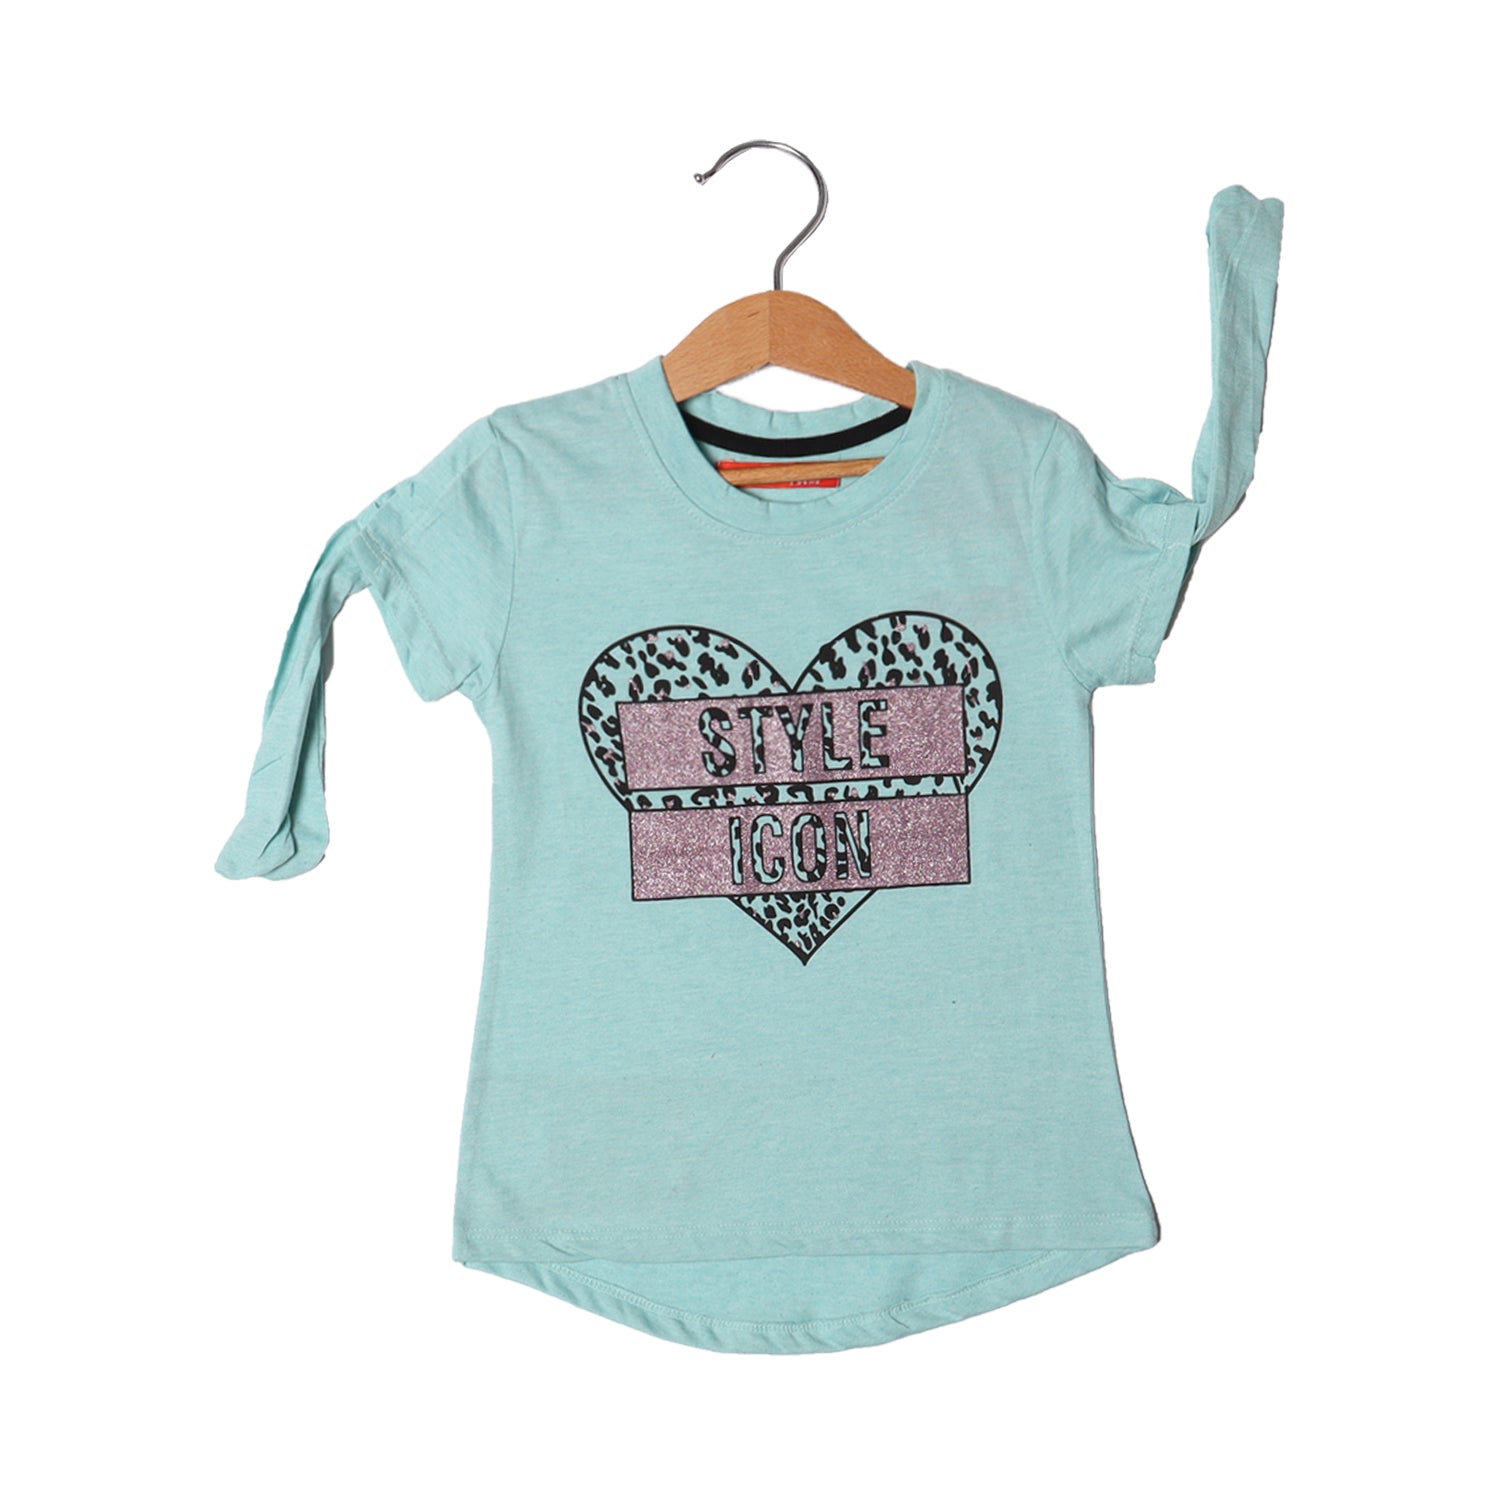 TURQUOISE HEART STYLE ICON PRINTED T-SHIRT FOR GIRLS